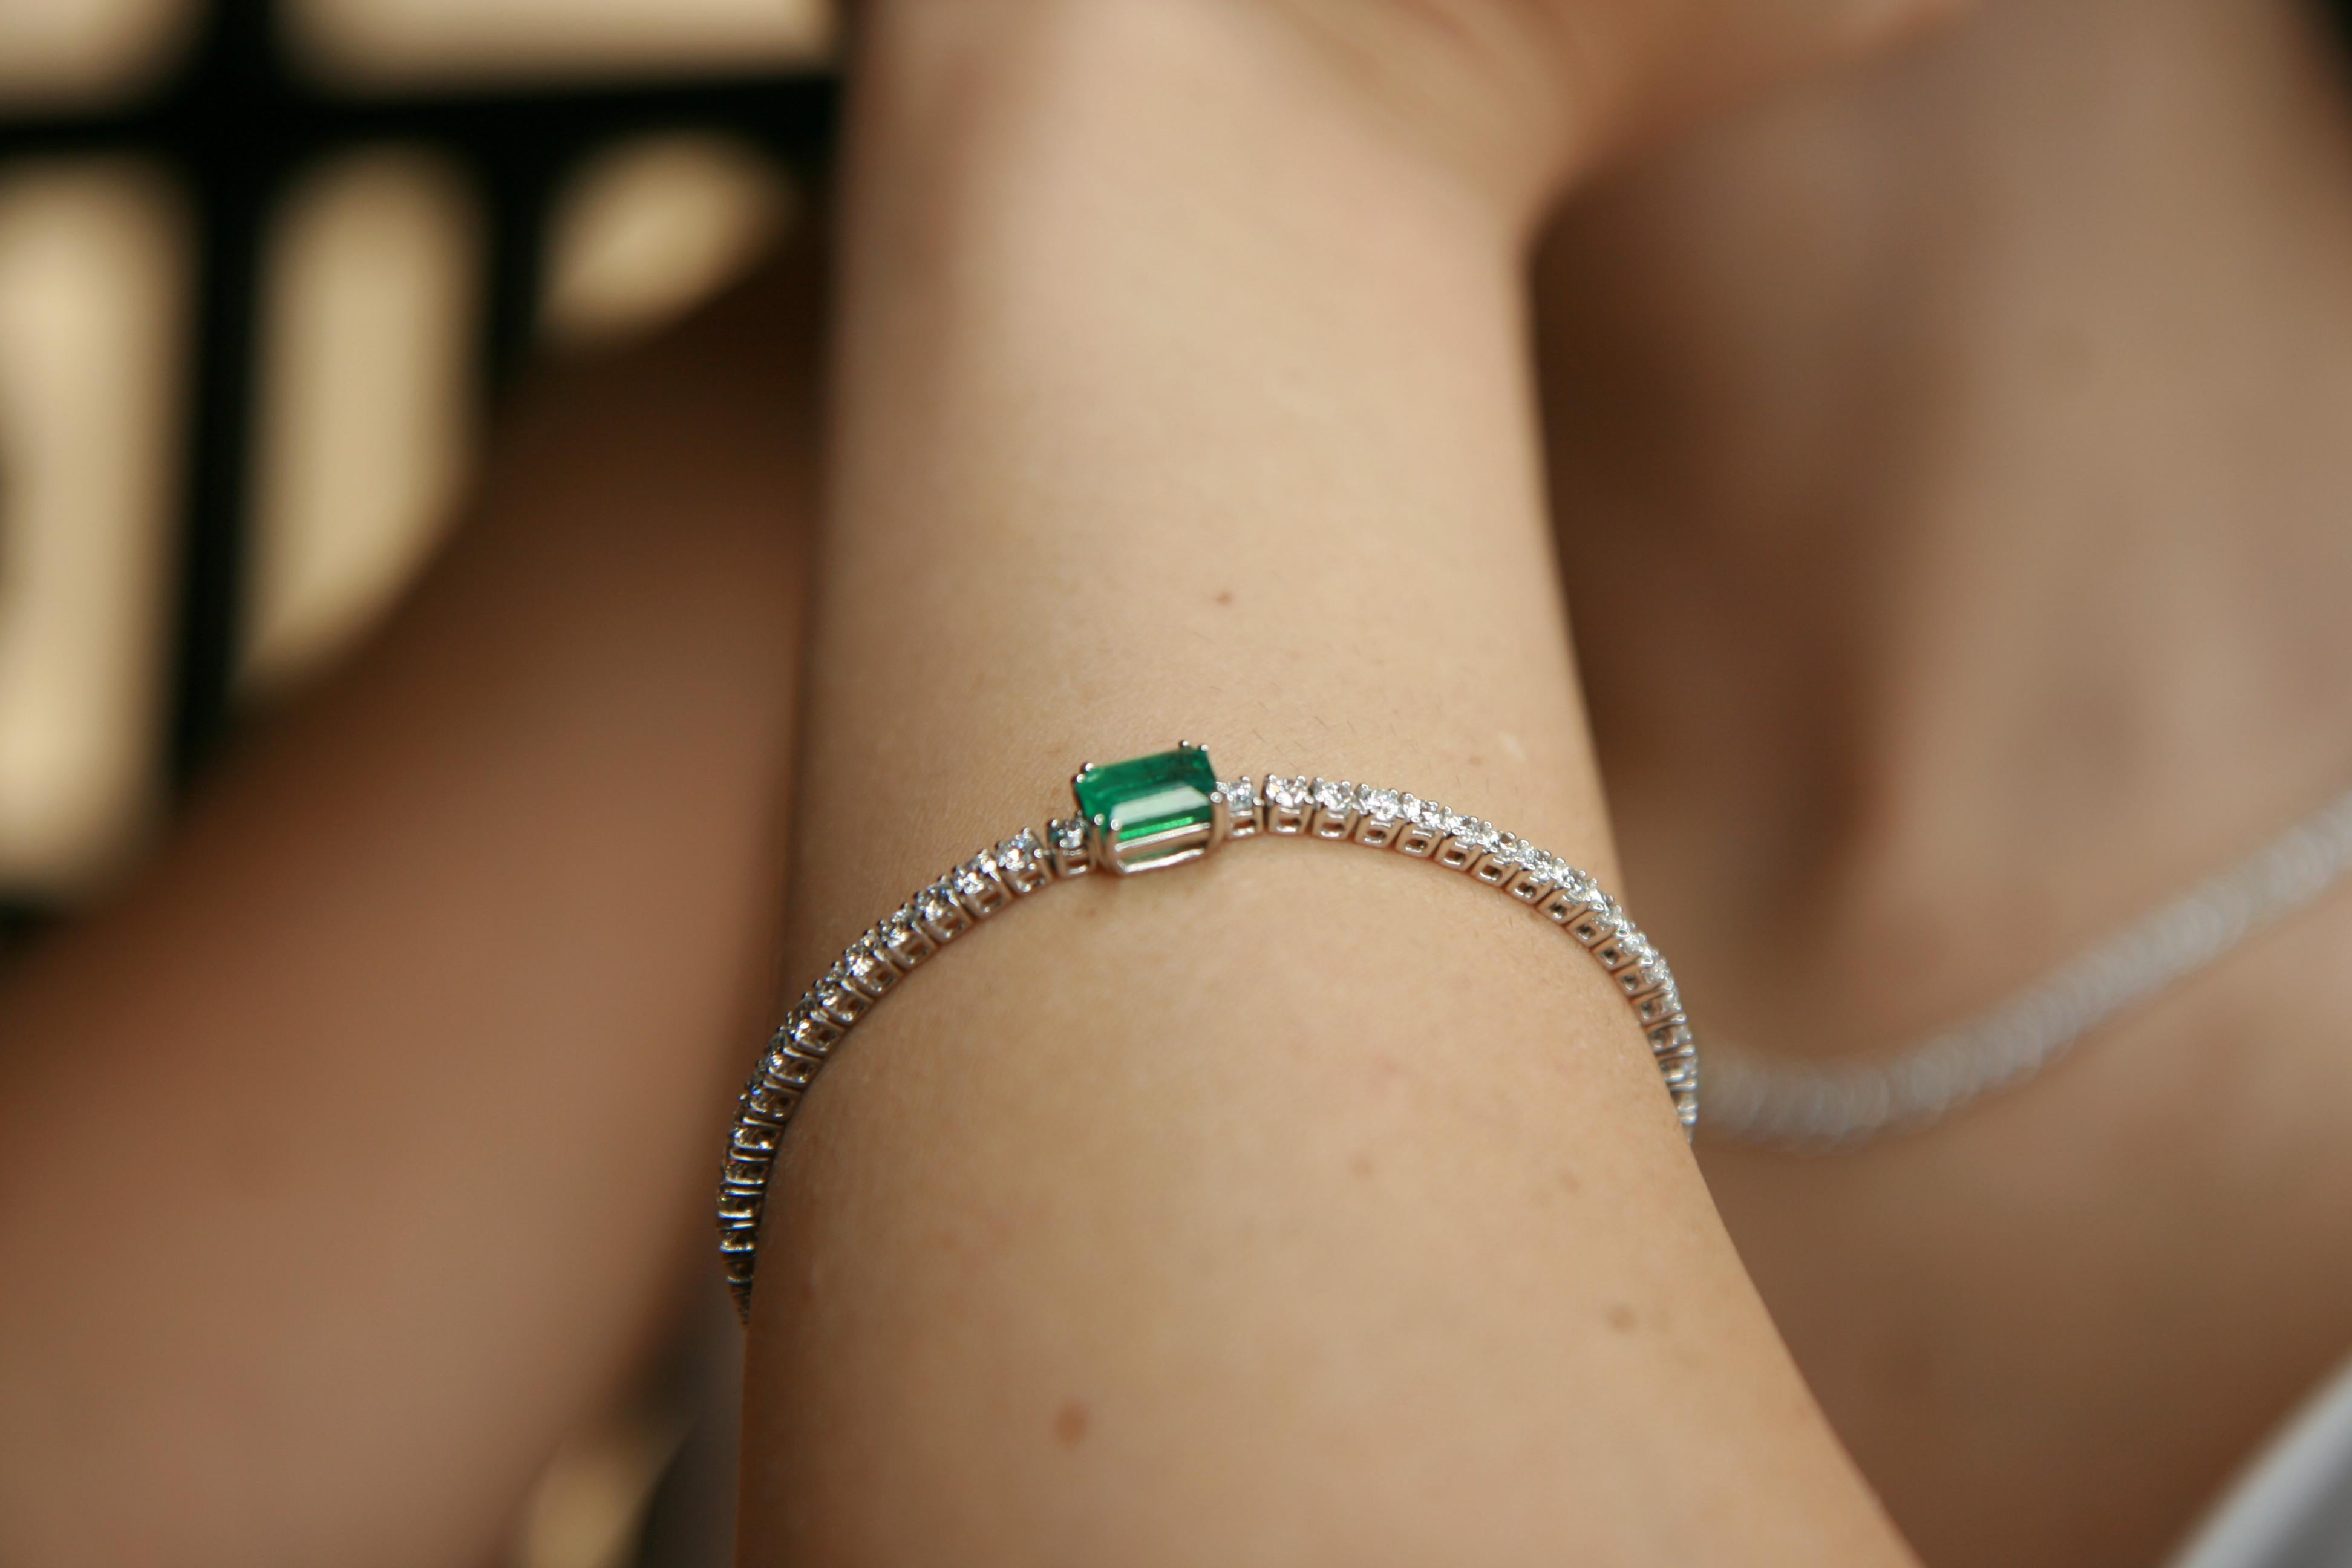 11.81 grams 18 carat white gold tennis bracelet with 4.81 carats for a trotal of 61 stones of VS G color diamonds and a 2.15 carat rectangular shape colombian emerald the lenght of the bracelet is 17,5 cm.This tennis bracelet is part of our